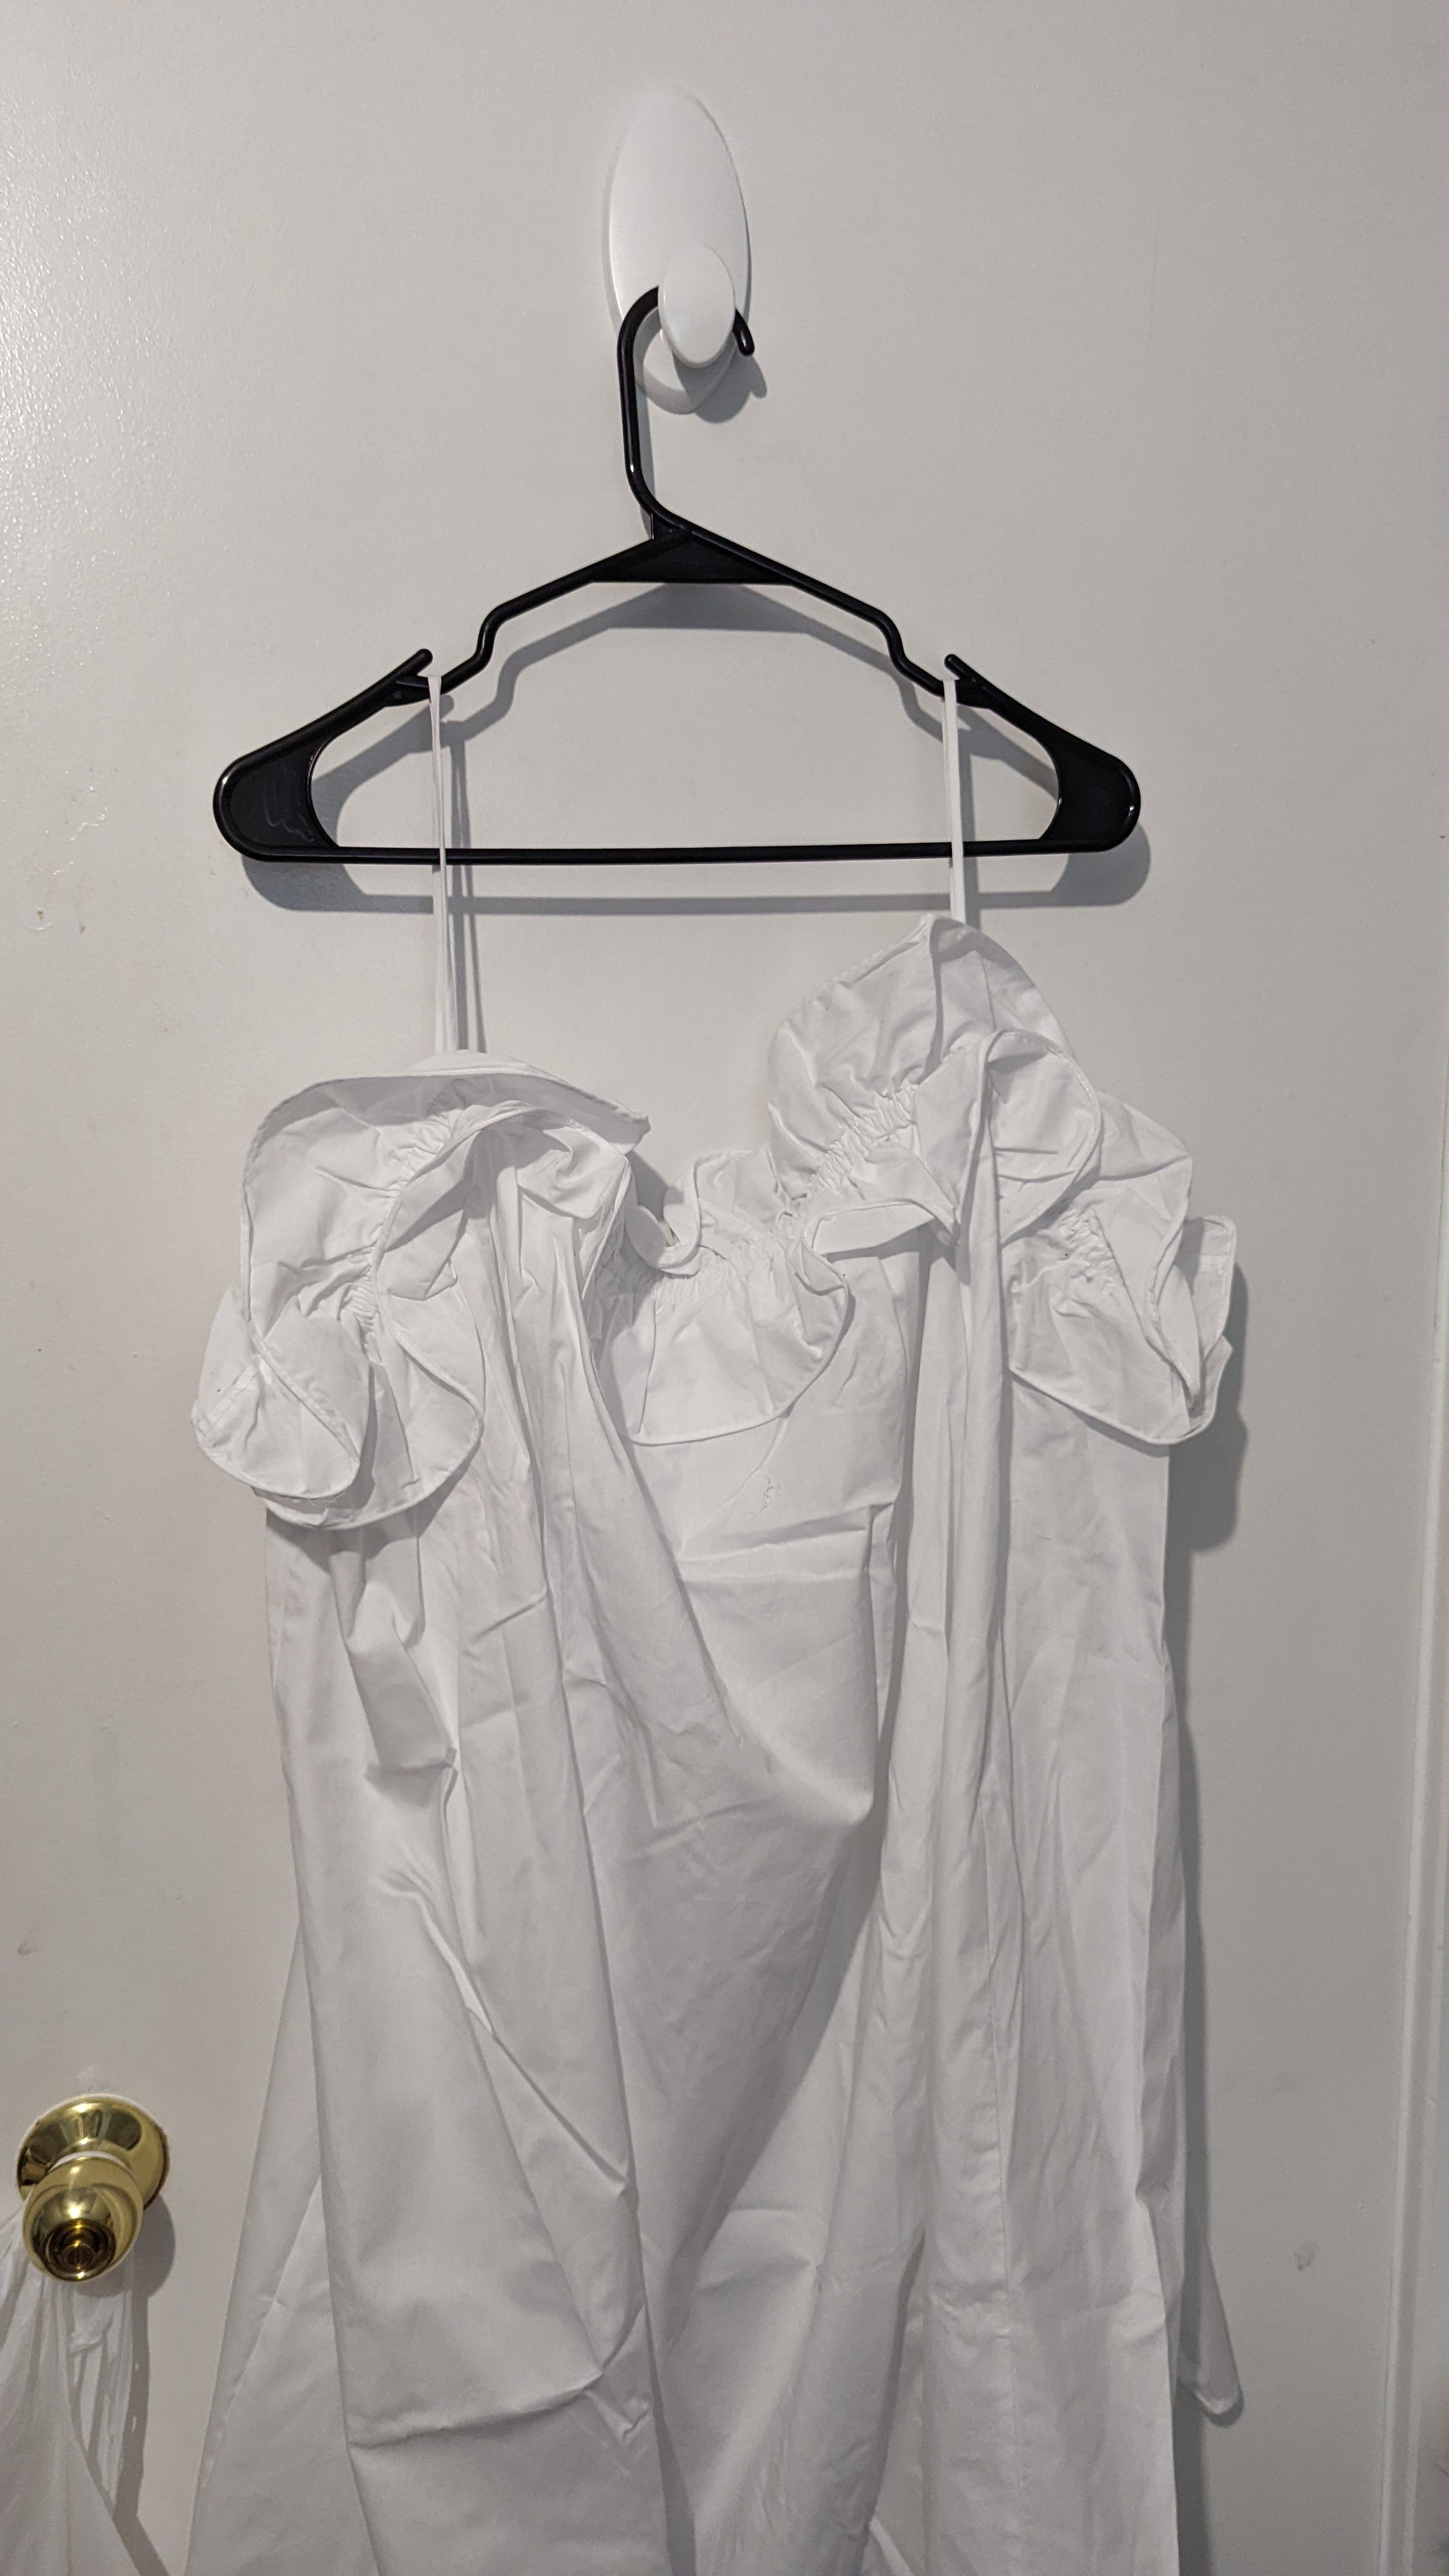 A spaghetti strap dress hanging from a hanger